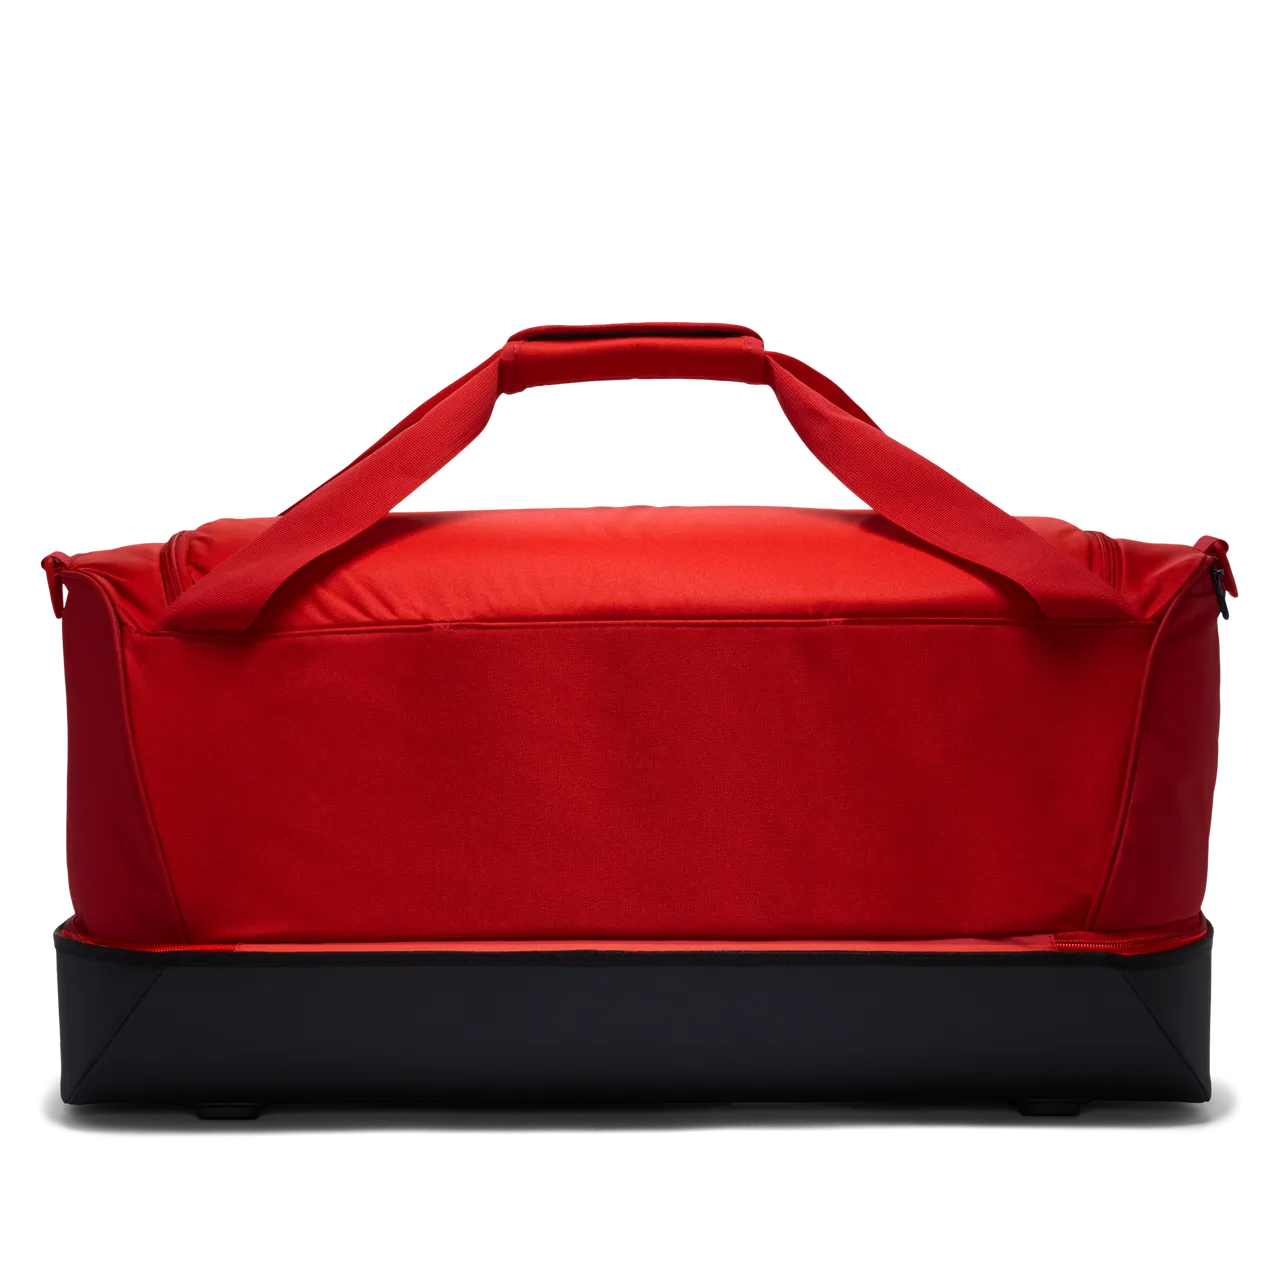 Nike Academy Team Football Hardcase Duffel Bag (Large, 59L) - Red - Polyester